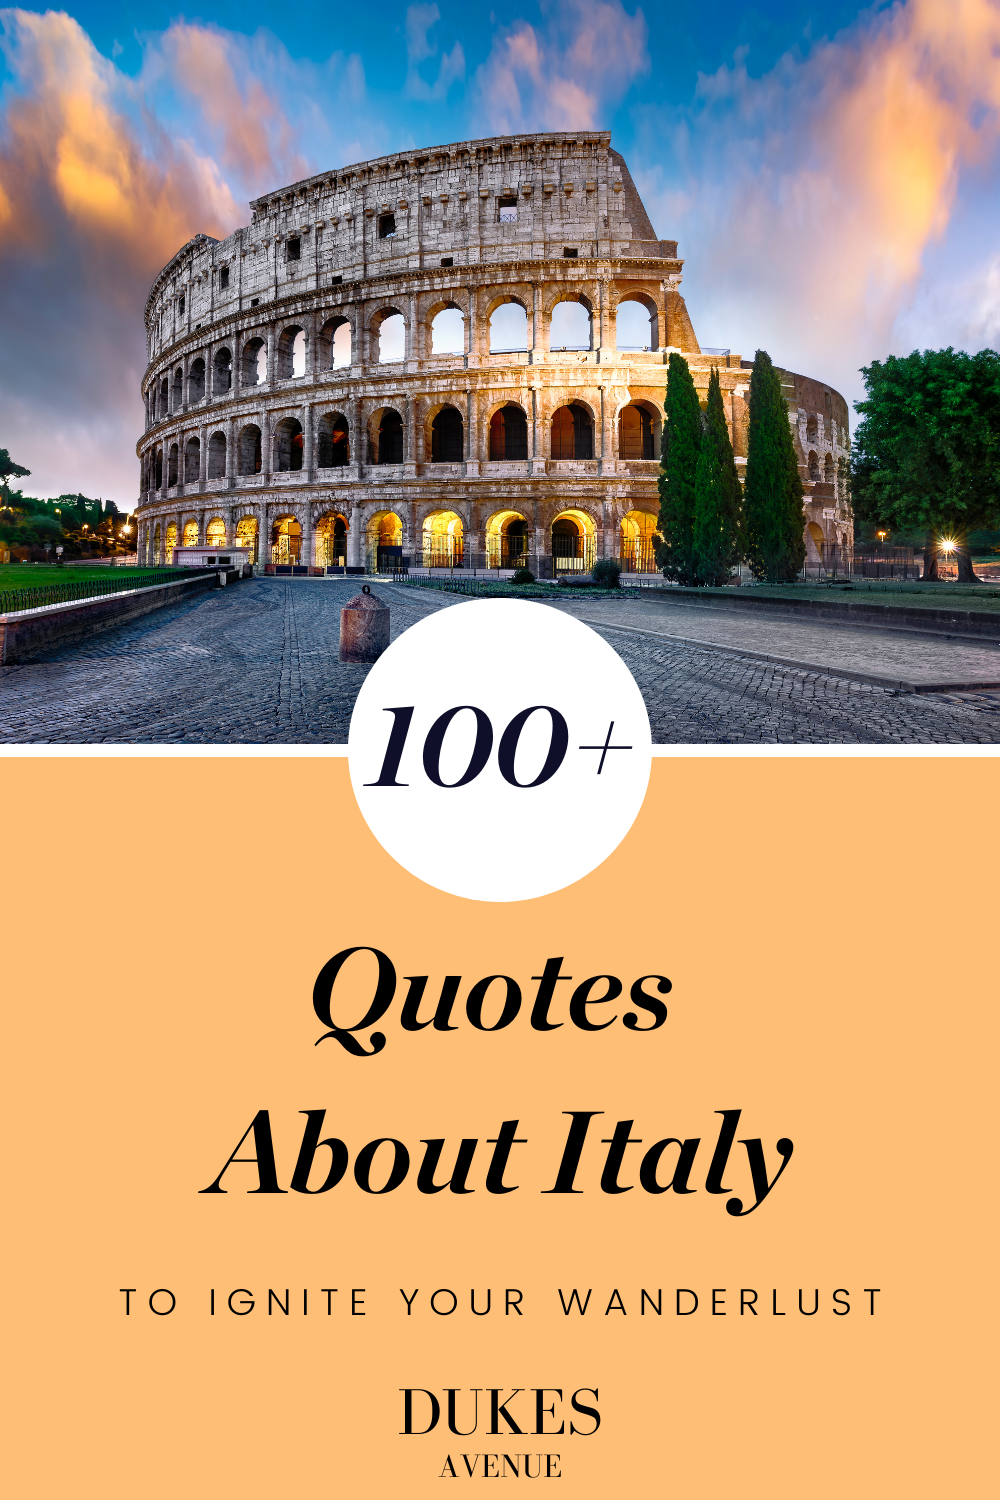 The Colosseum during sunset with text overlay "100+ quotes about Italy to ignite your wanderlust"